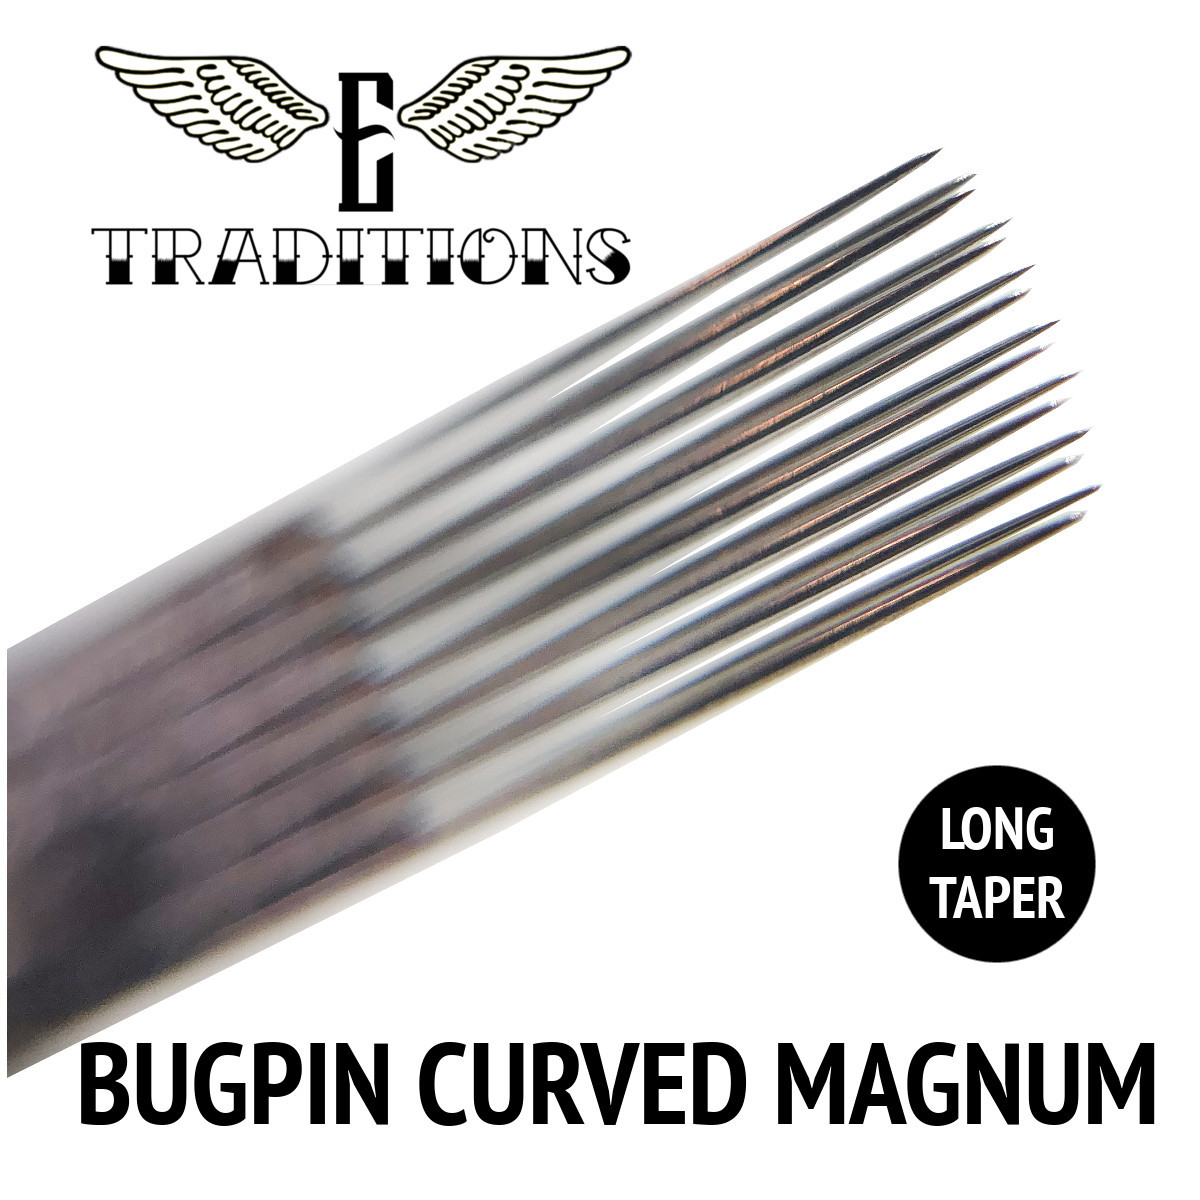 10 Box 1213 RM 13 Curved Magnum Tattoo Needle Wholesale 500 pieces